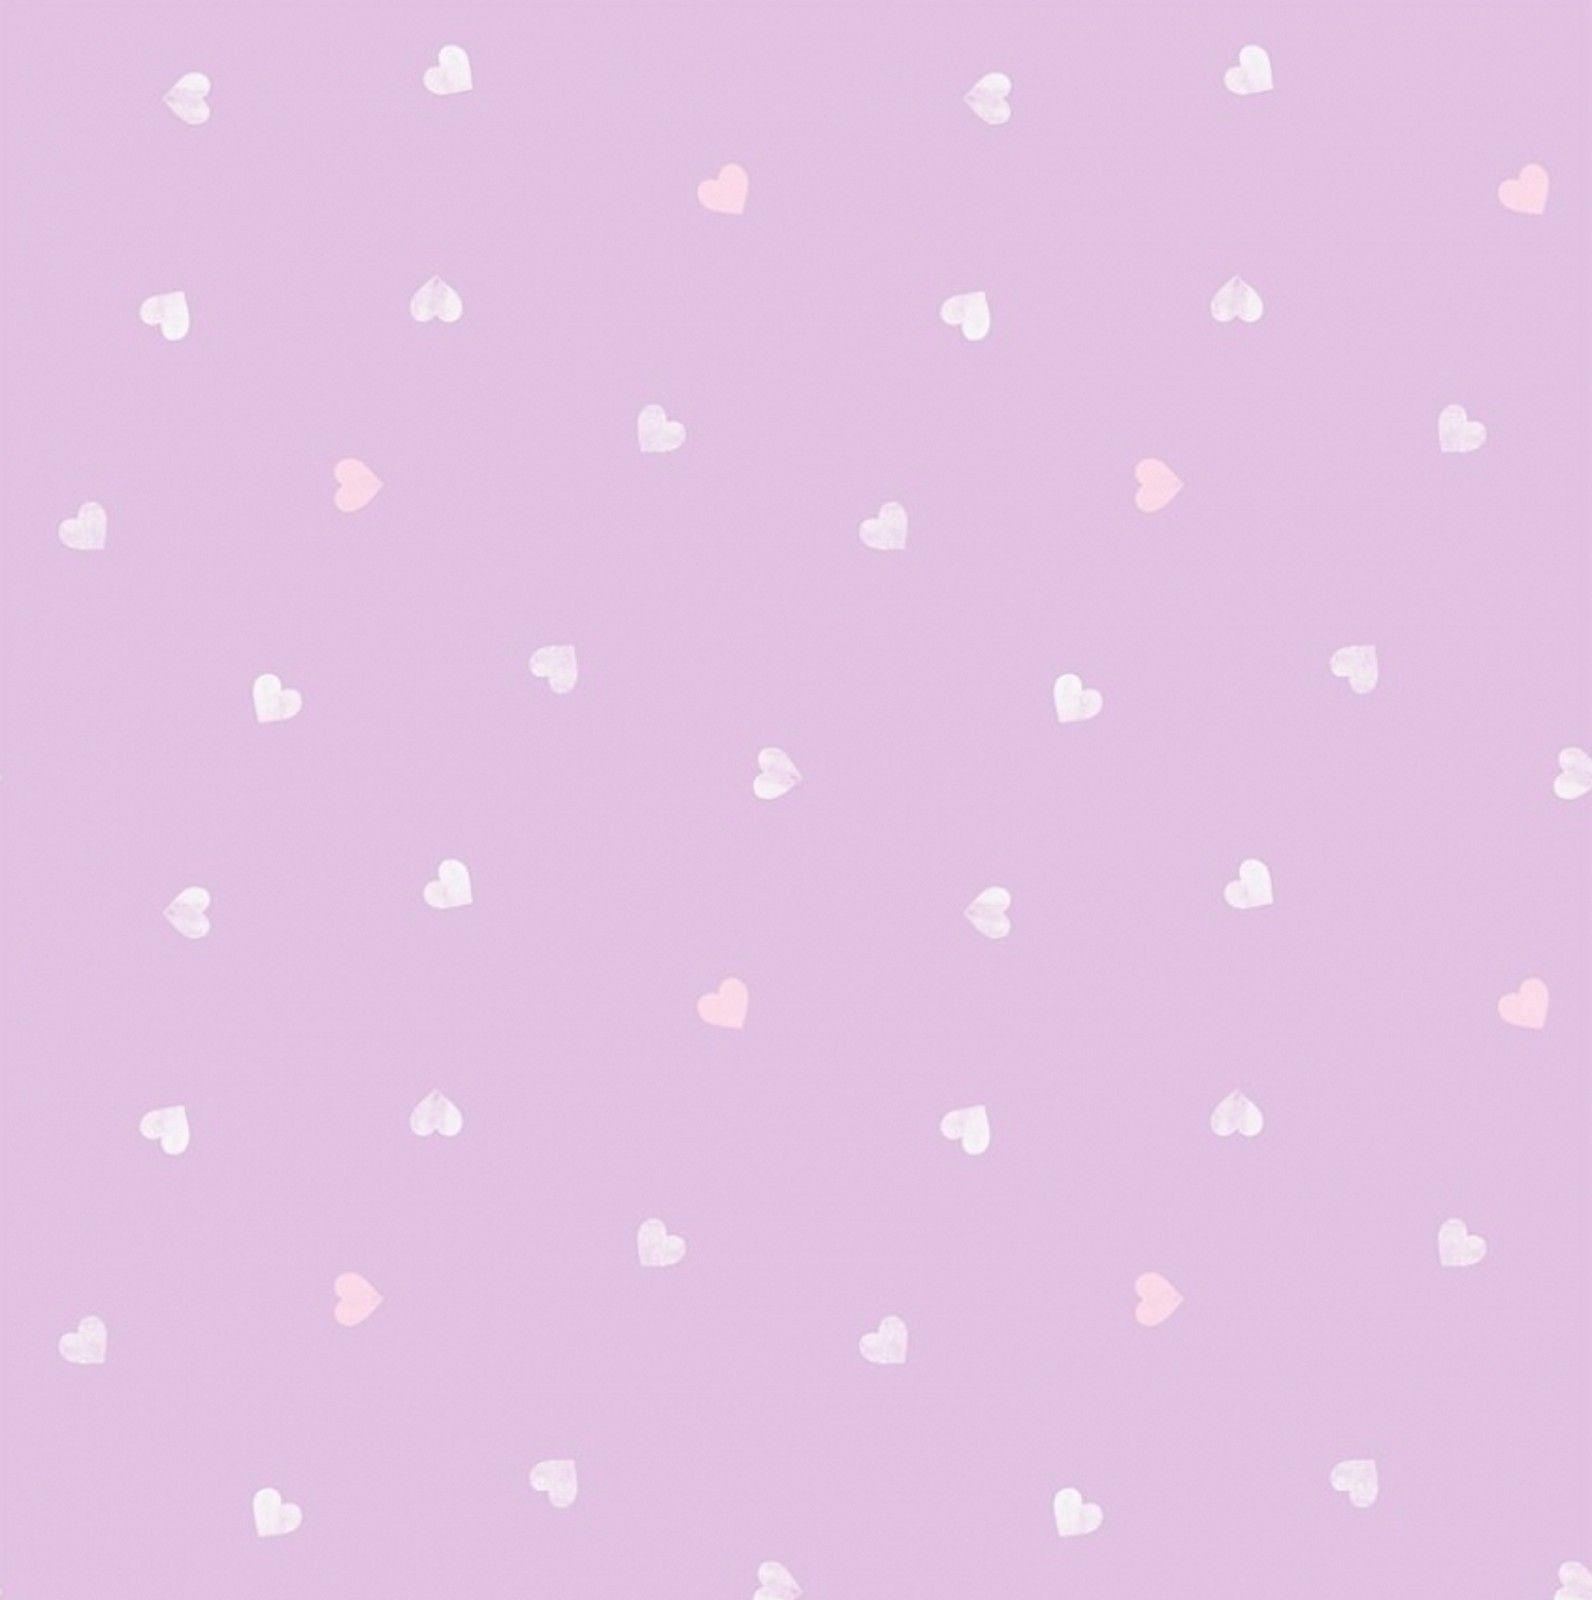 Pastel Pink and Purple Wallpapers - Top Free Pastel Pink and Purple ...